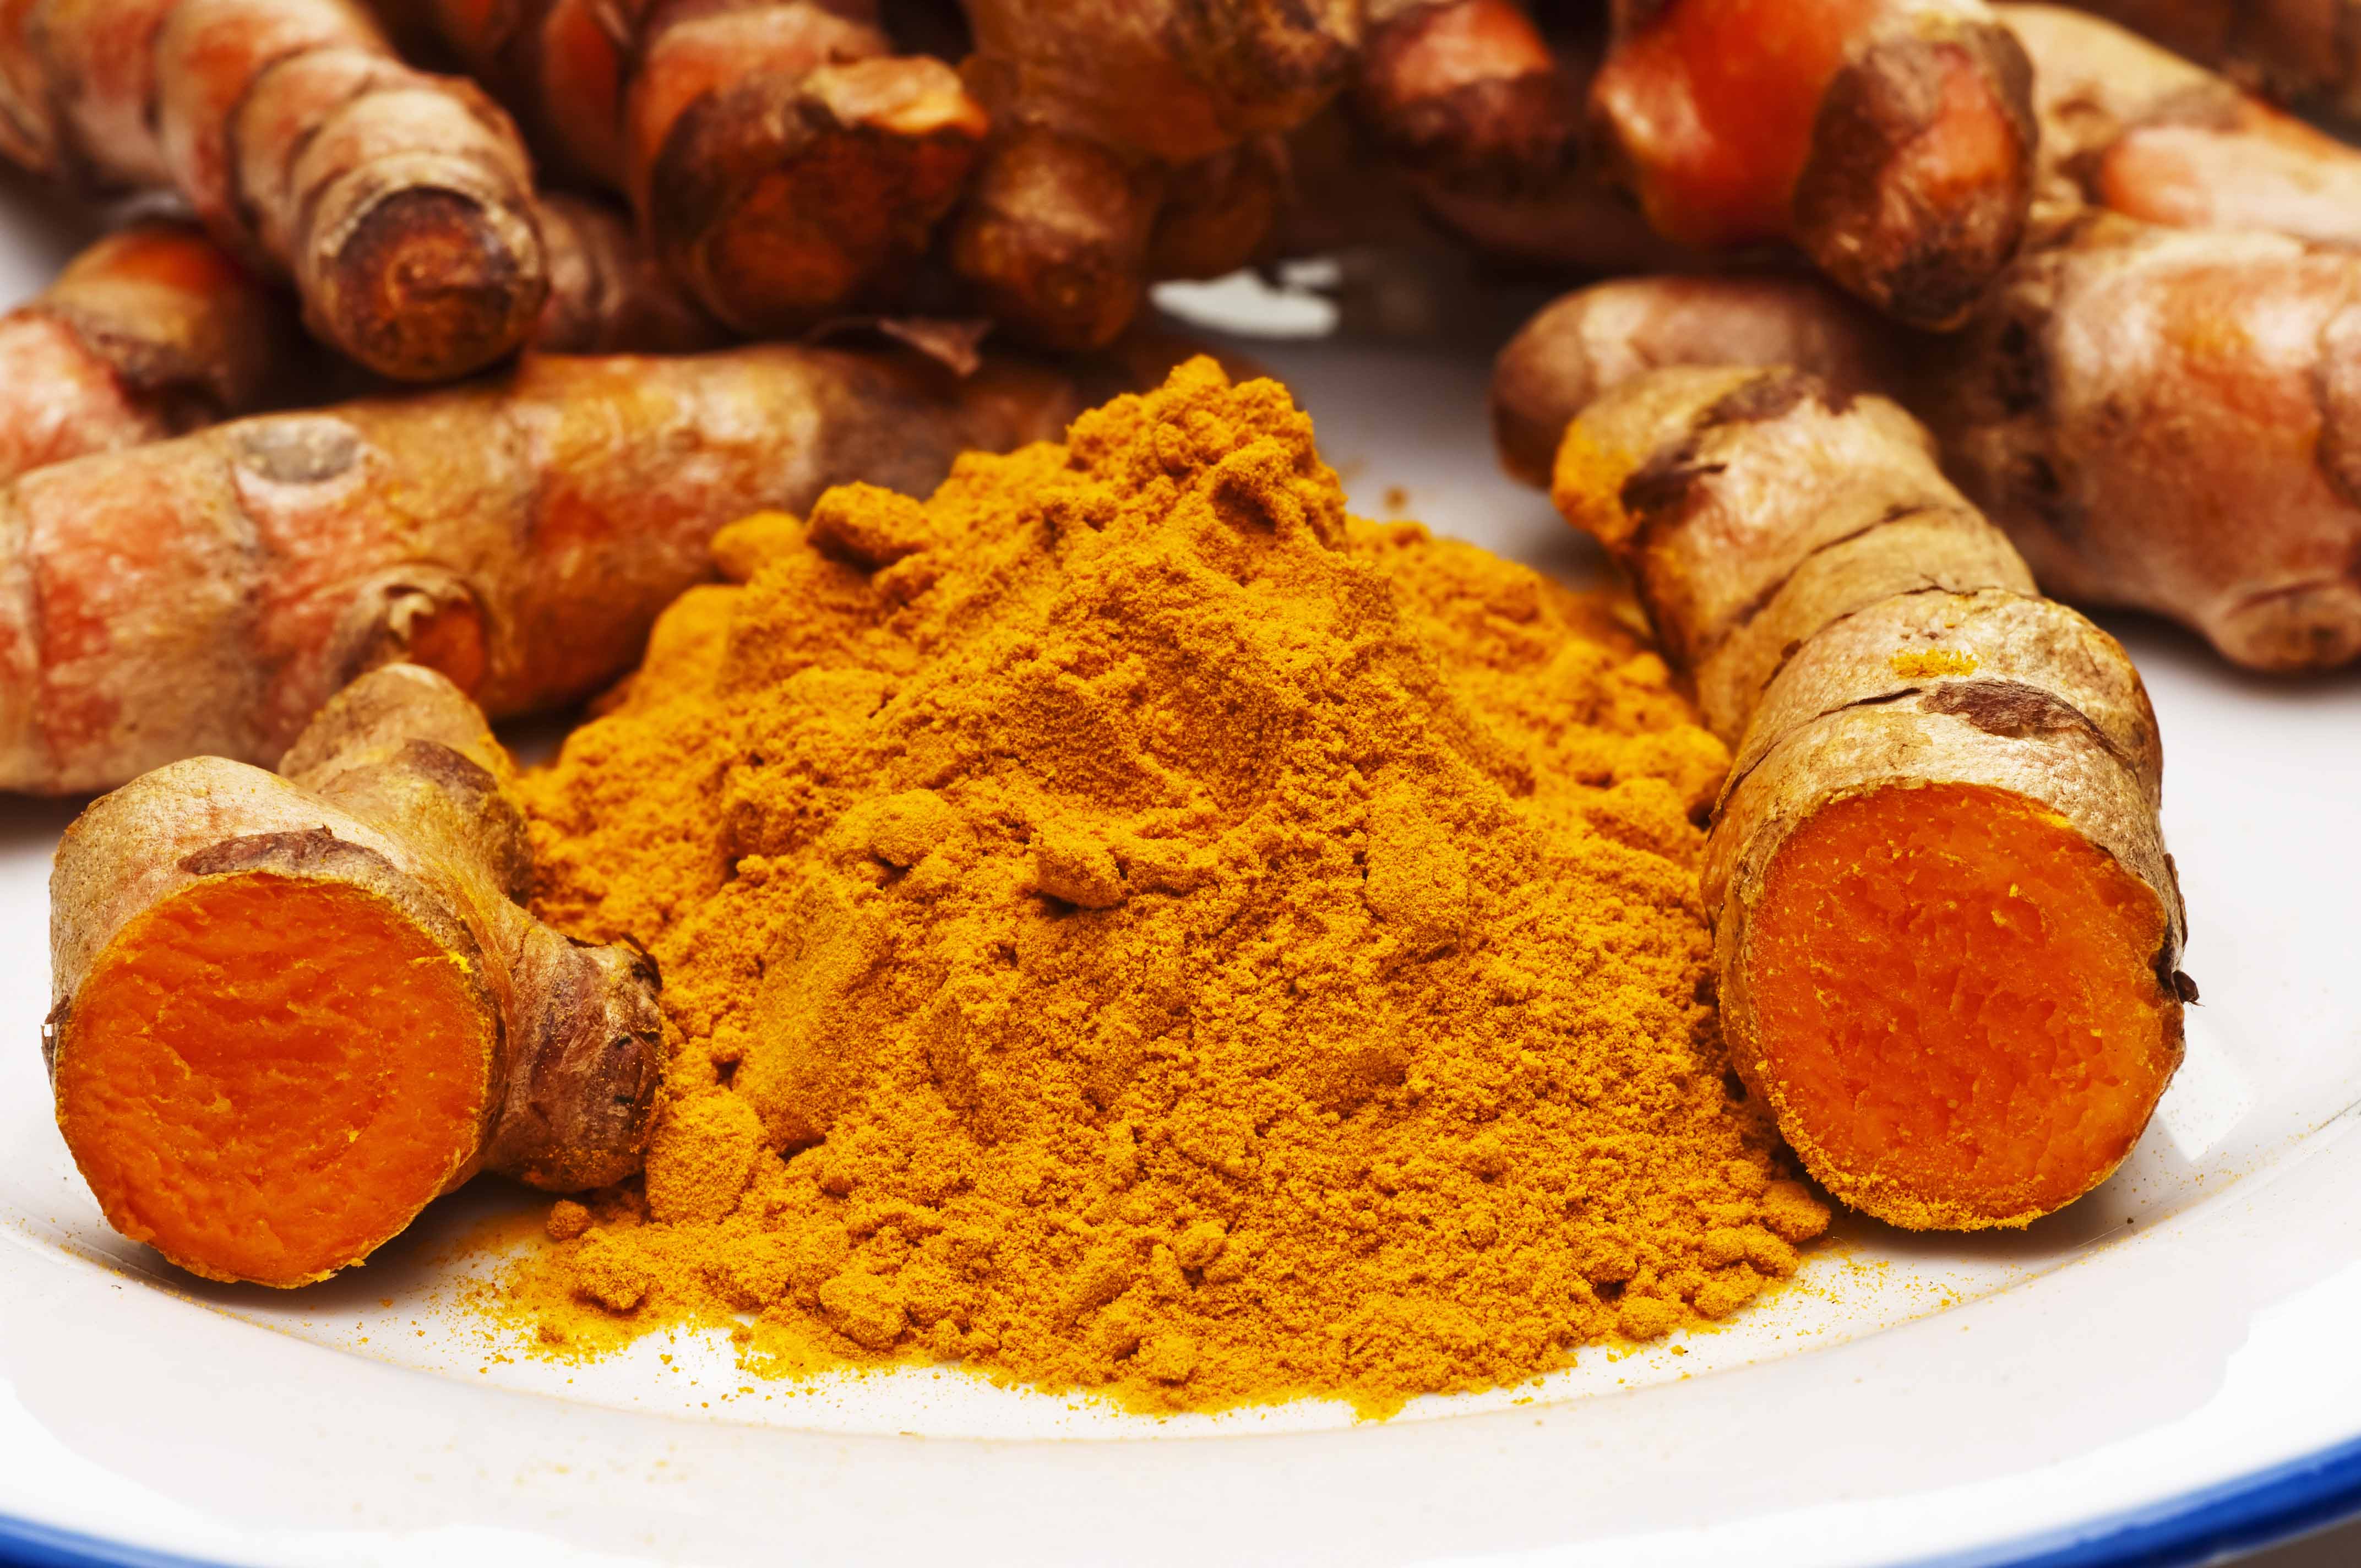 BCM-95® (Curcugreen®)- THE WORLD'S MOST RESEARCHED BIO-AVAILABLE CURCUMIN